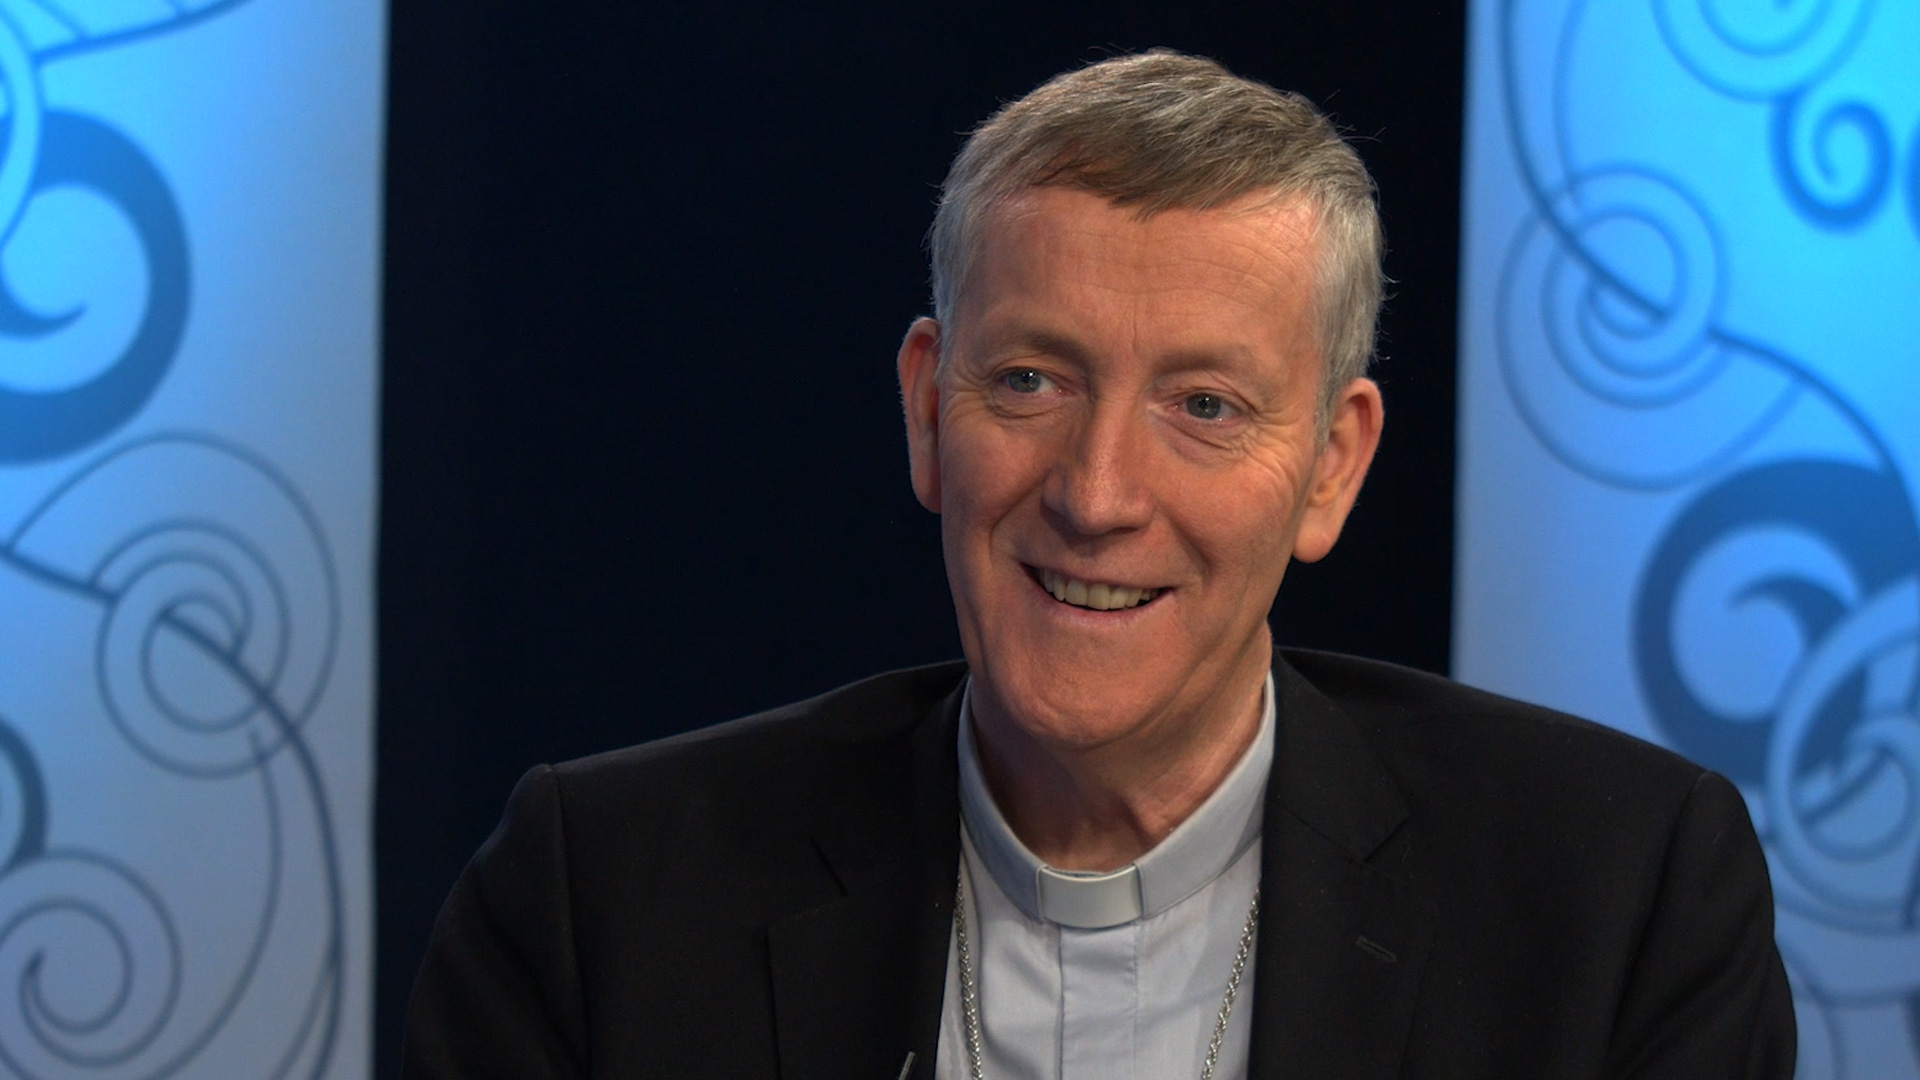 Welcoming New Boards of Management – Bishop Denis Nulty